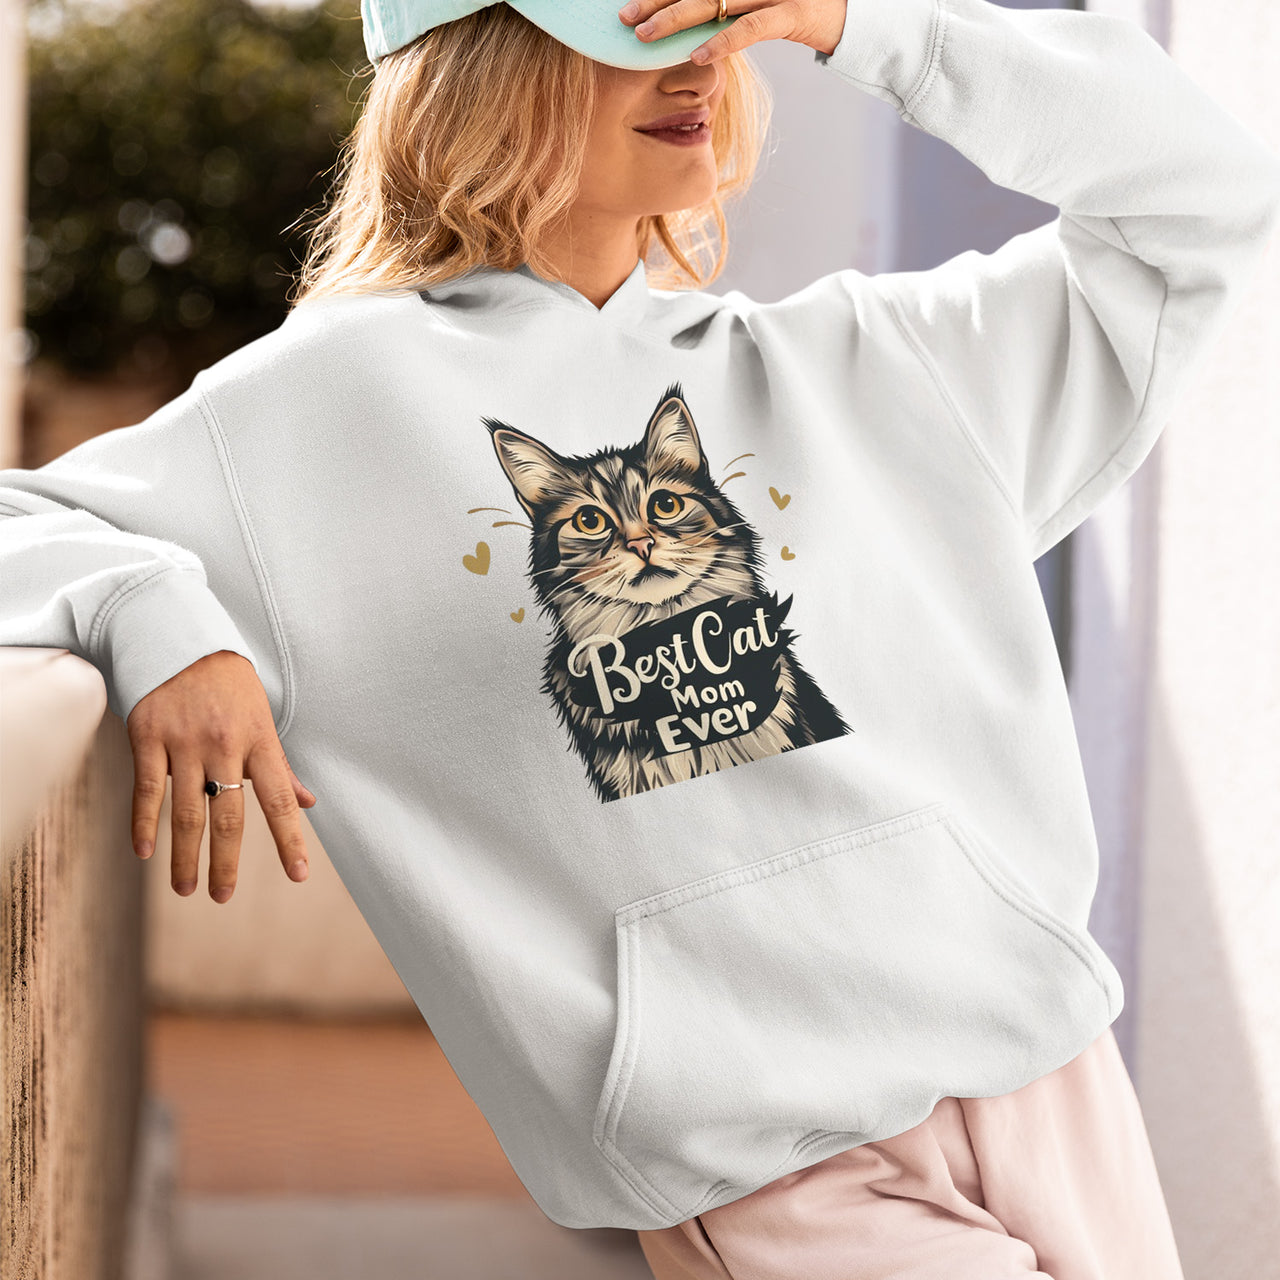 Best Cat Mom Ever Shirt, Best Cat Mom Shirt, Pet Lover Shirt, Cat Lover Shirt, Best Cat Mom Ever, Cat Owner Shirt, Gift For Cat Mom, Funny Cat Shirts, Women Cat T-Shirt, Mother's Day Gift, Cat Lover Wife Gifts, Cat Shirt 02